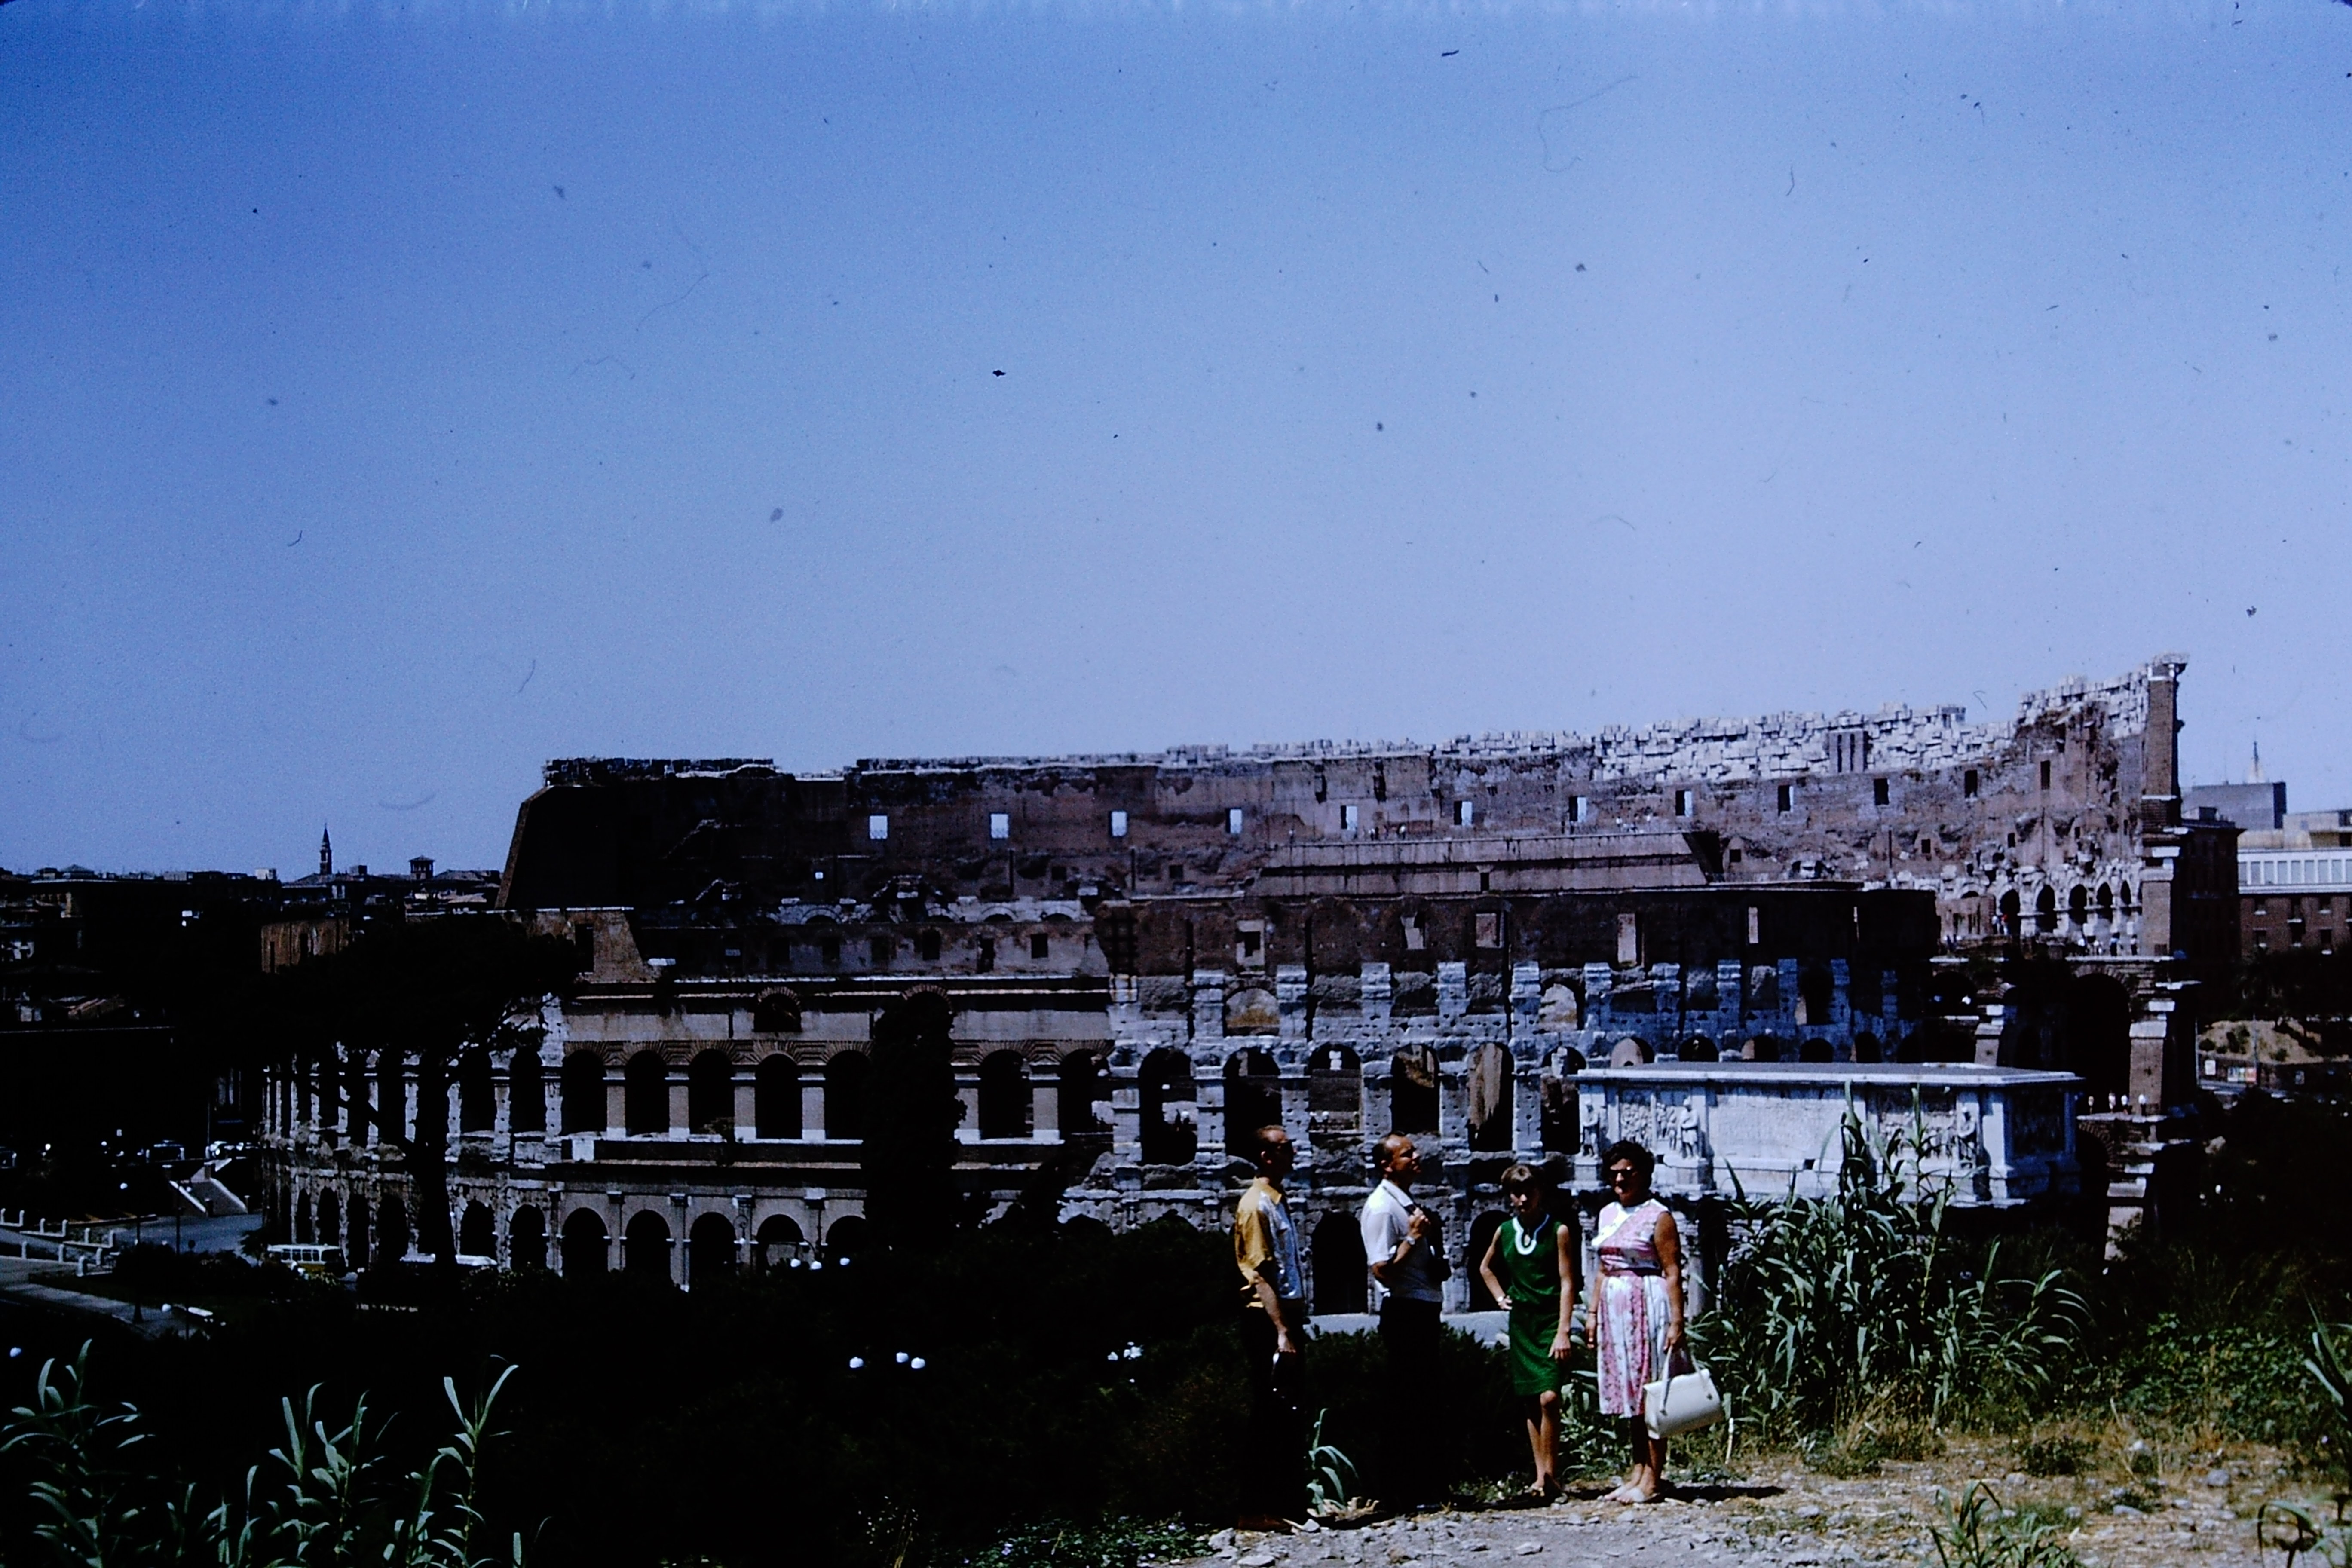 1963-swiss-alps-and-rome-trip-0028